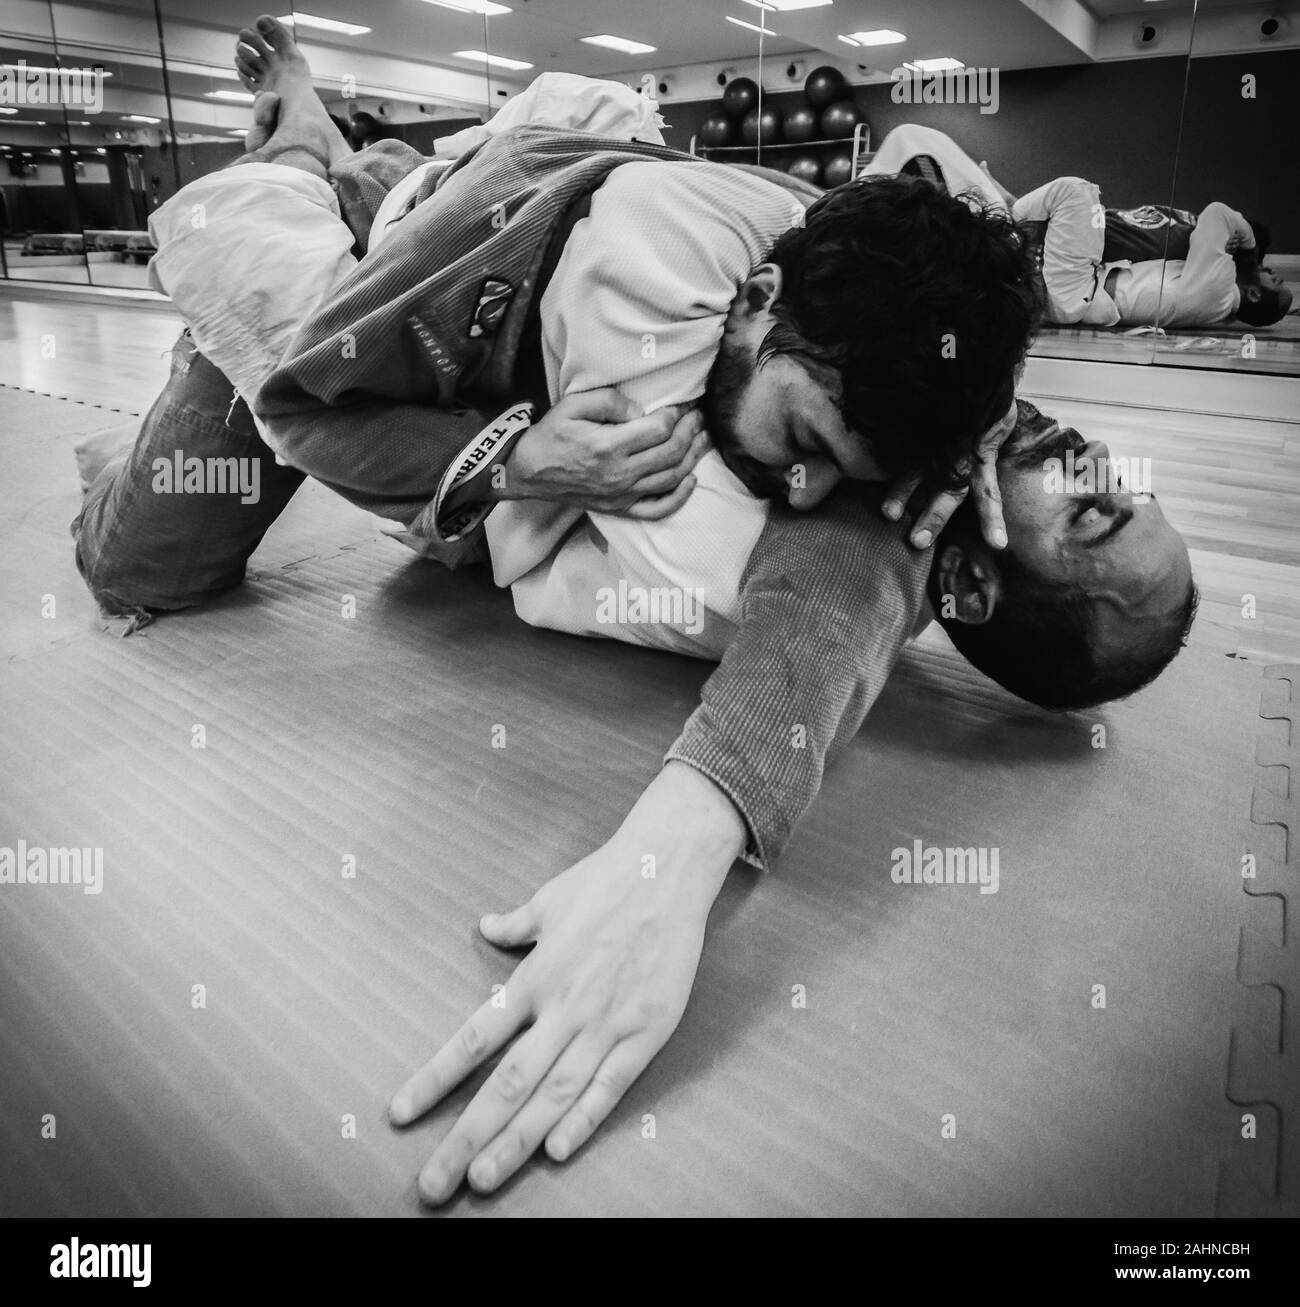 Two young men practice Brazilian Jiu-Jitsu sparring, a grappling type martial arts with a kimono gi - NOT STAGED Stock Photo